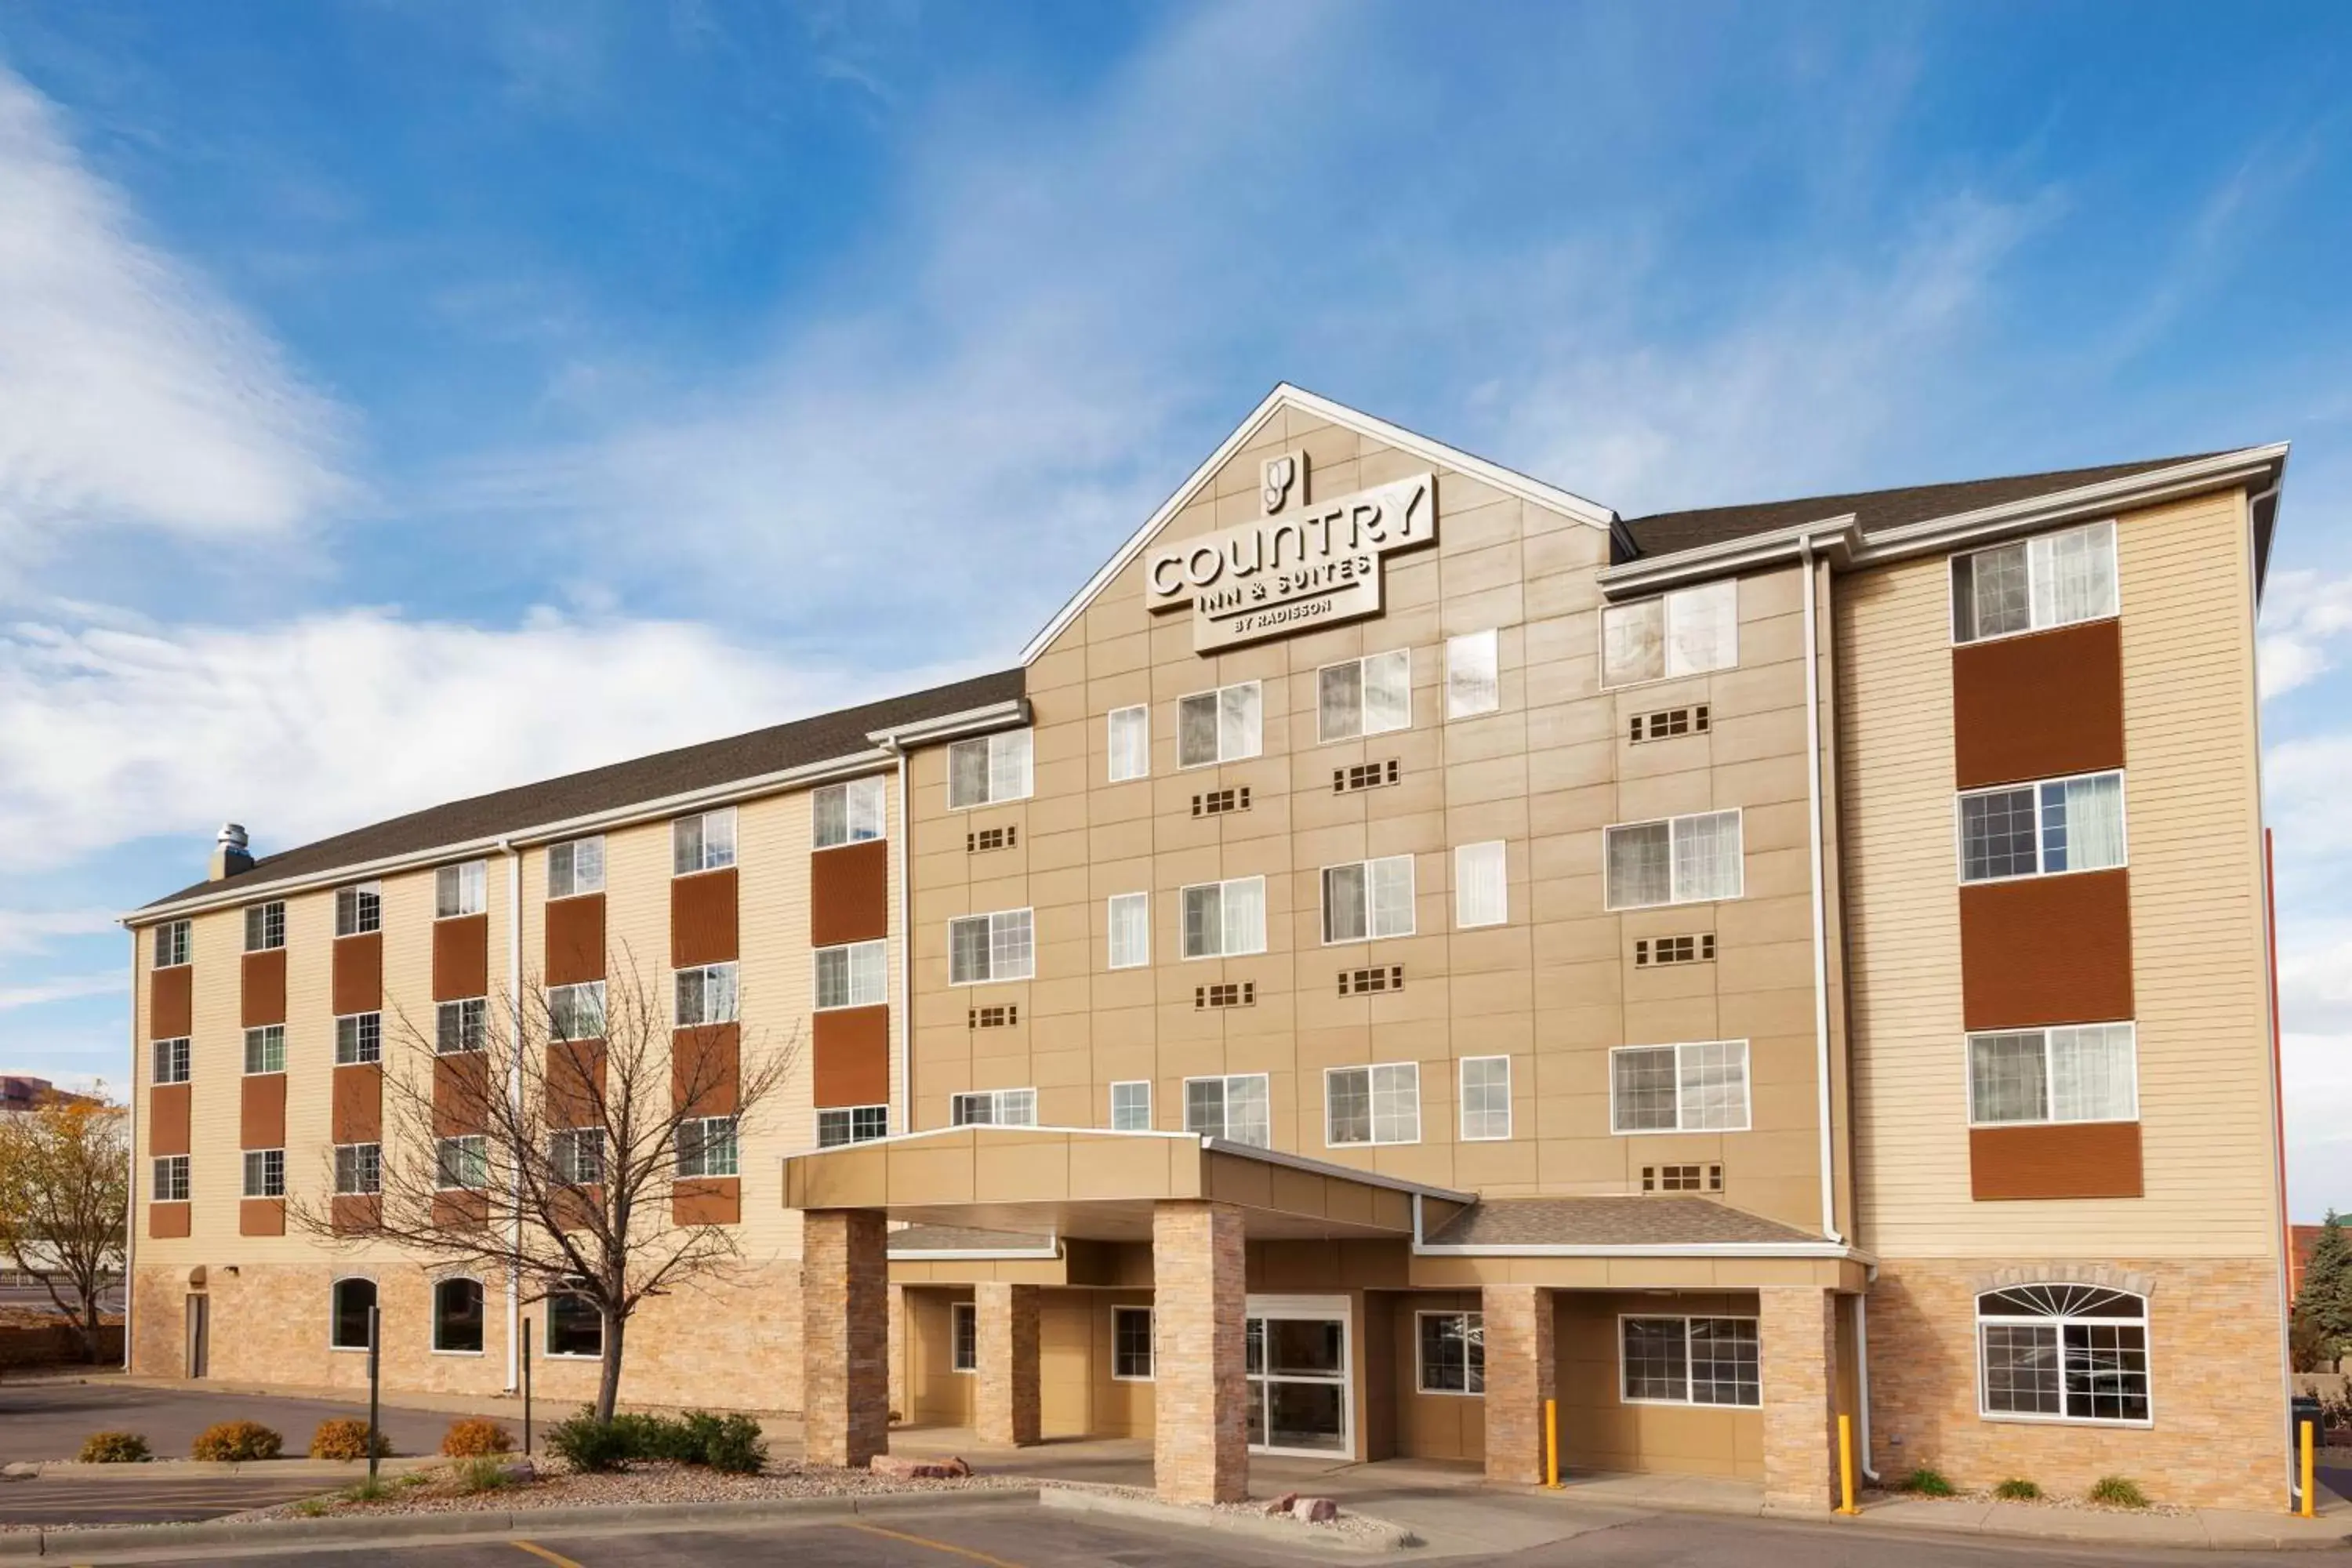 Property building in Country Inn & Suites by Radisson, Sioux Falls, SD